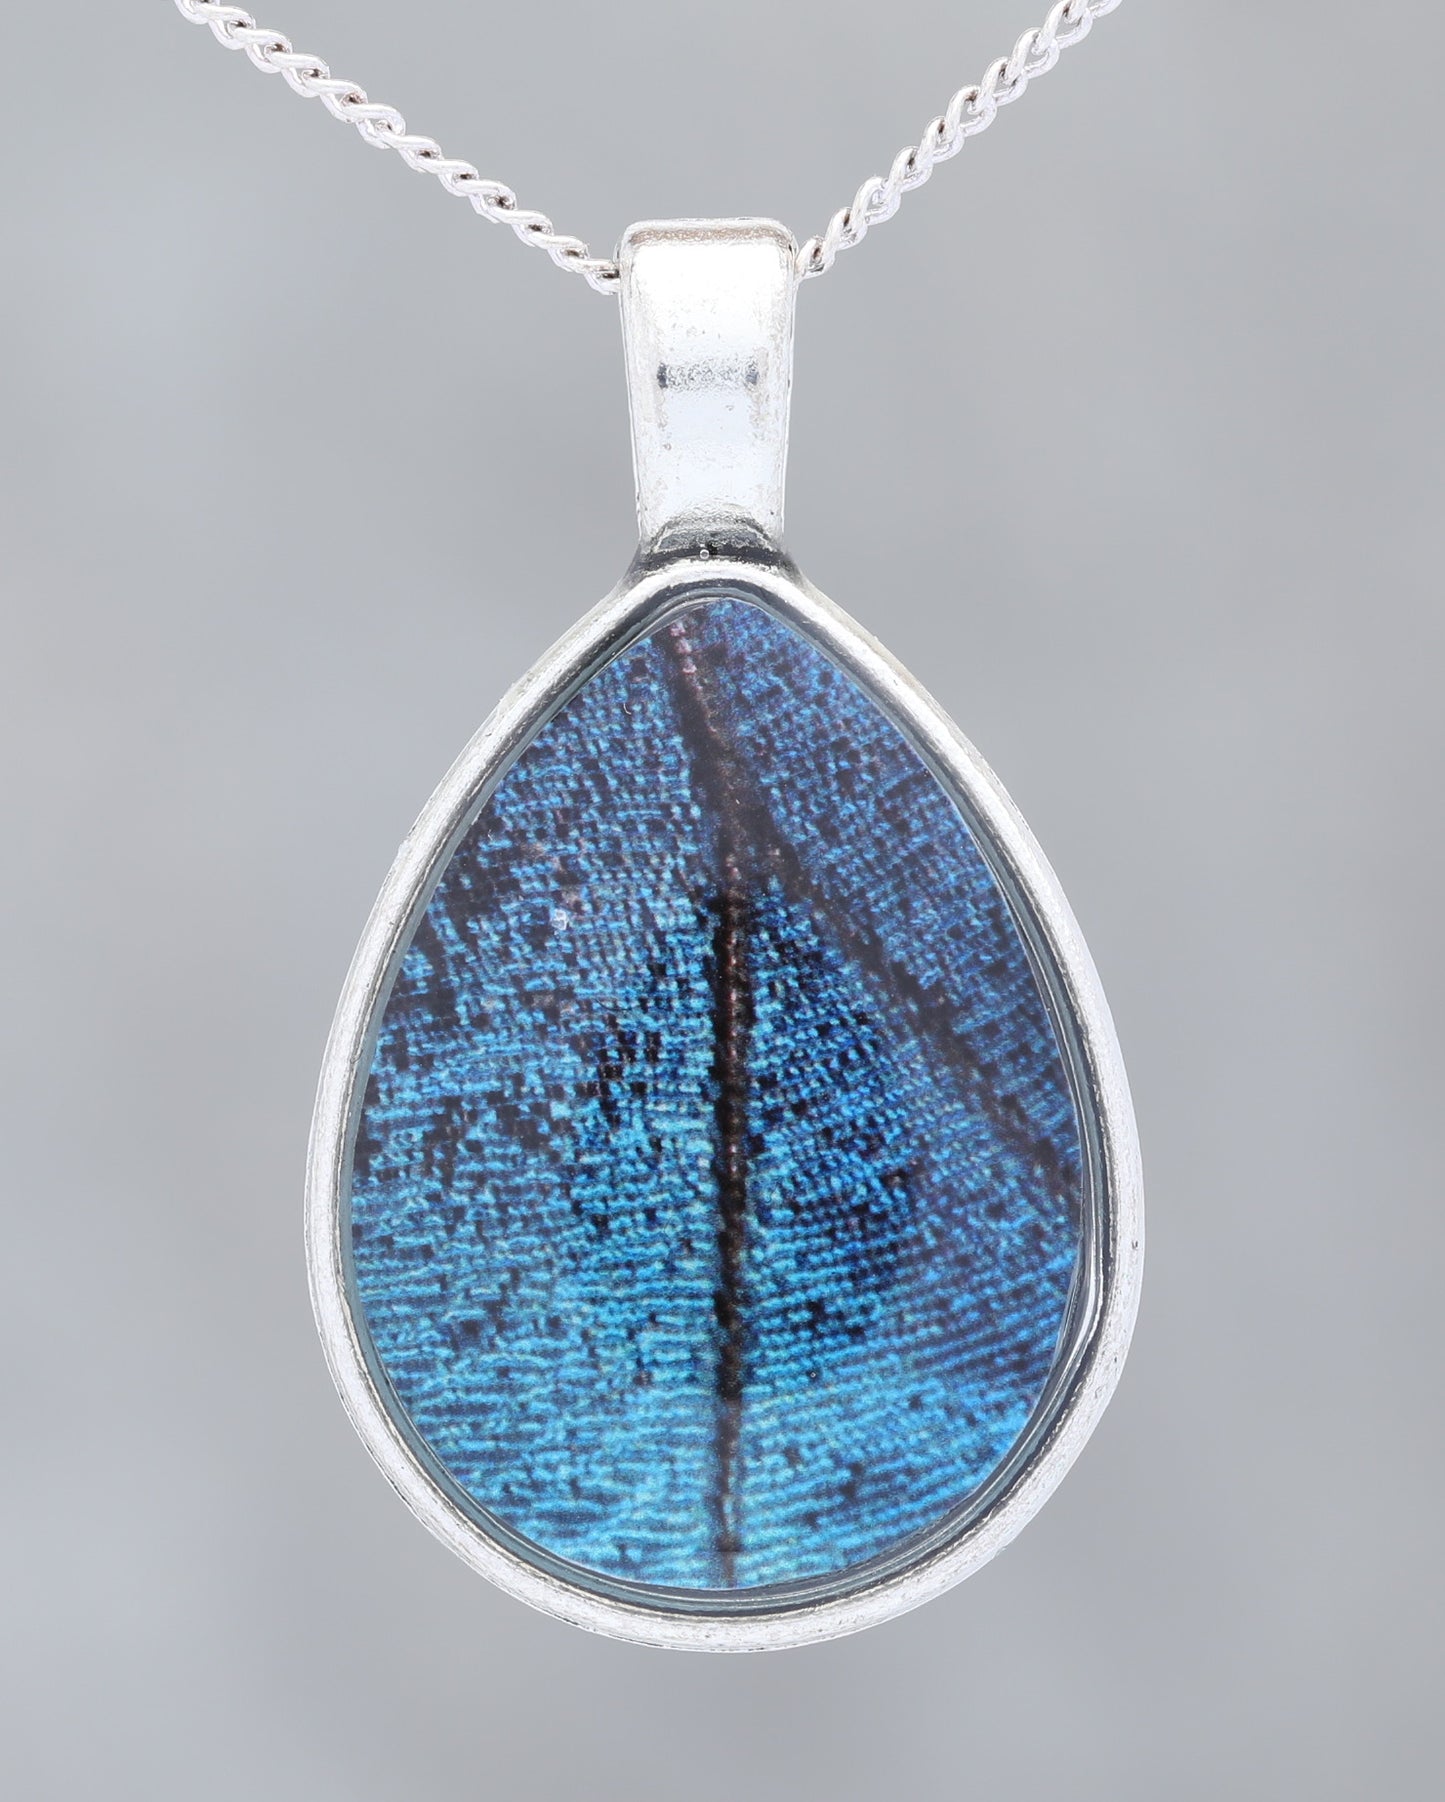 Blue Morpho  - Glow-in-the-dark pendant with an image of a Butterfly's wing set in a blue stone-like bezel